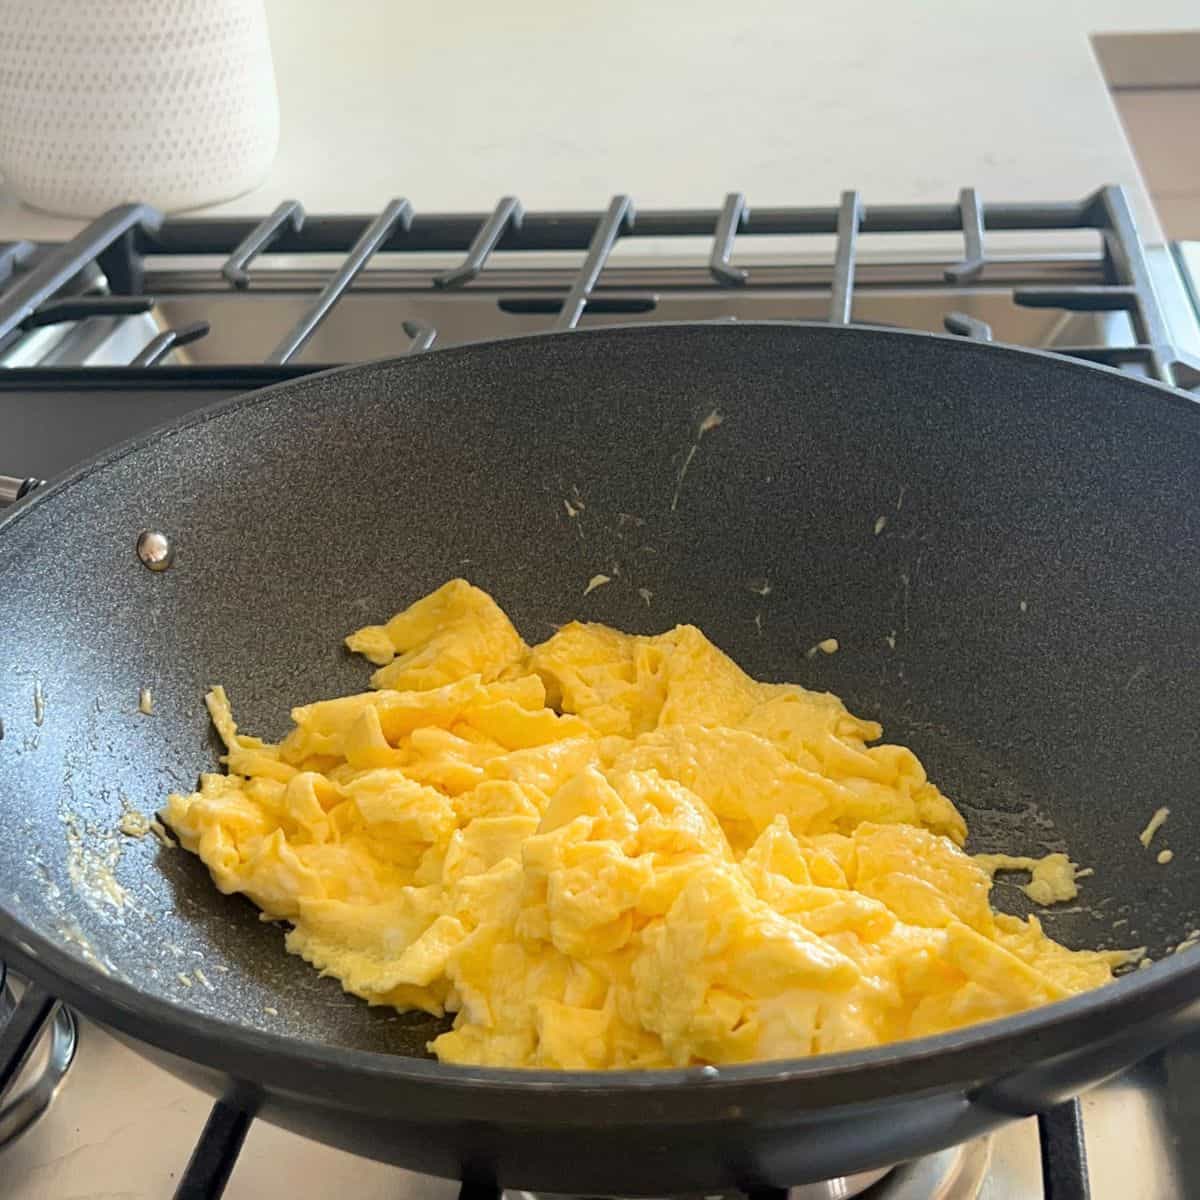 Add 2 tablespoons of oil then cook the eggs until they are just set but still runny. Stirring well and breaking them apart into large pieces for about 45 seconds. 